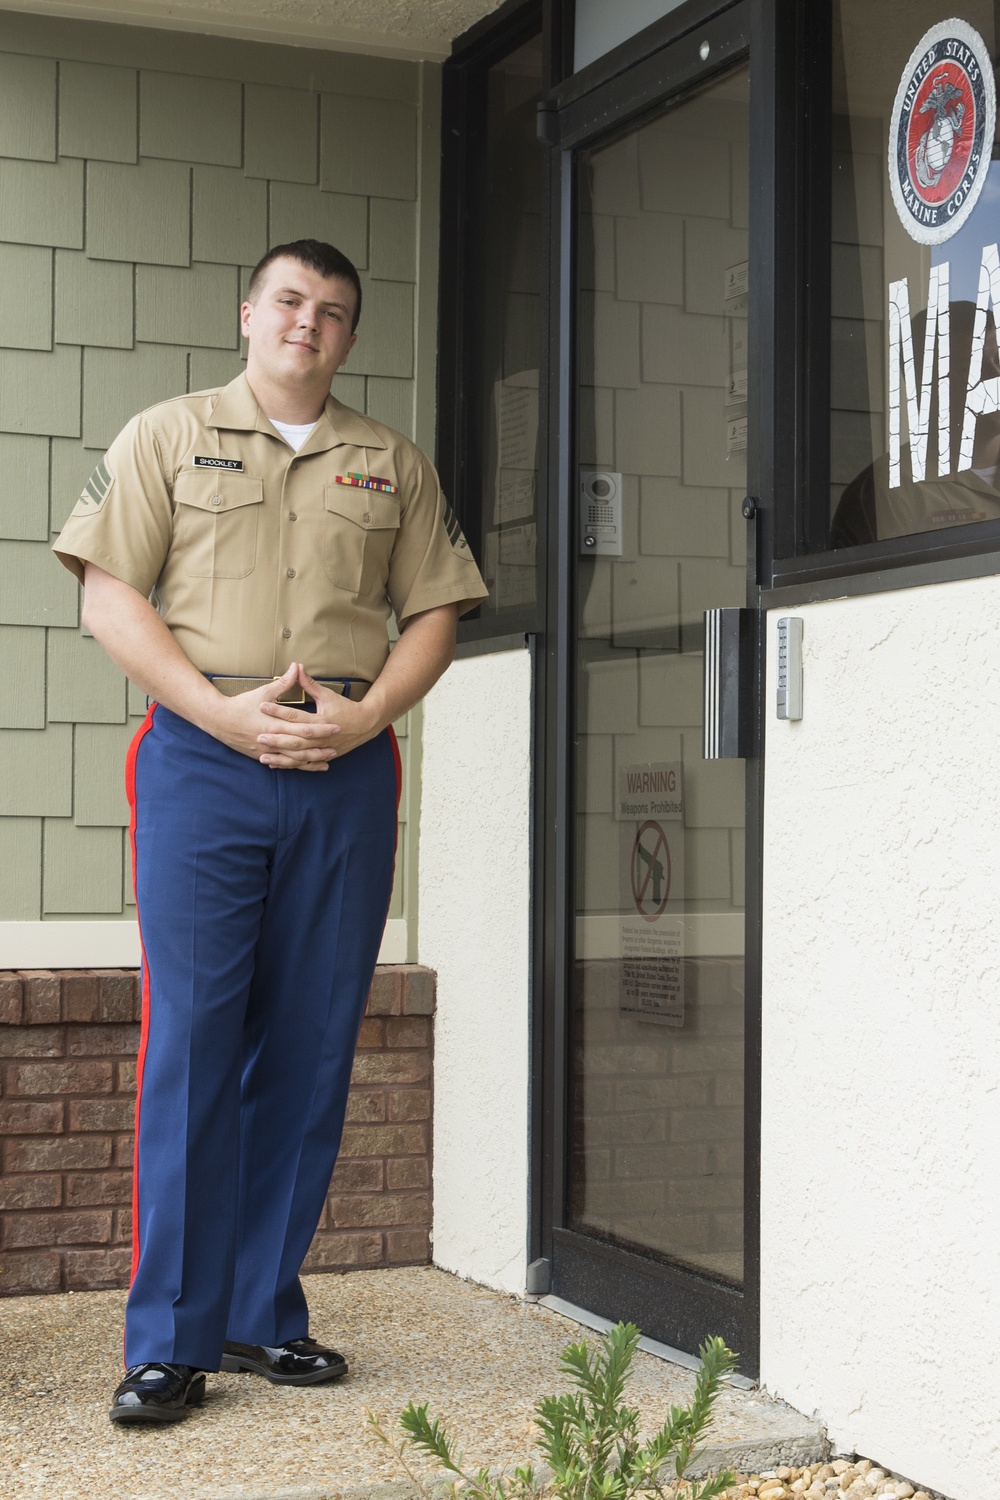 Florida native returns to hometown, helps locals join Marine Corps